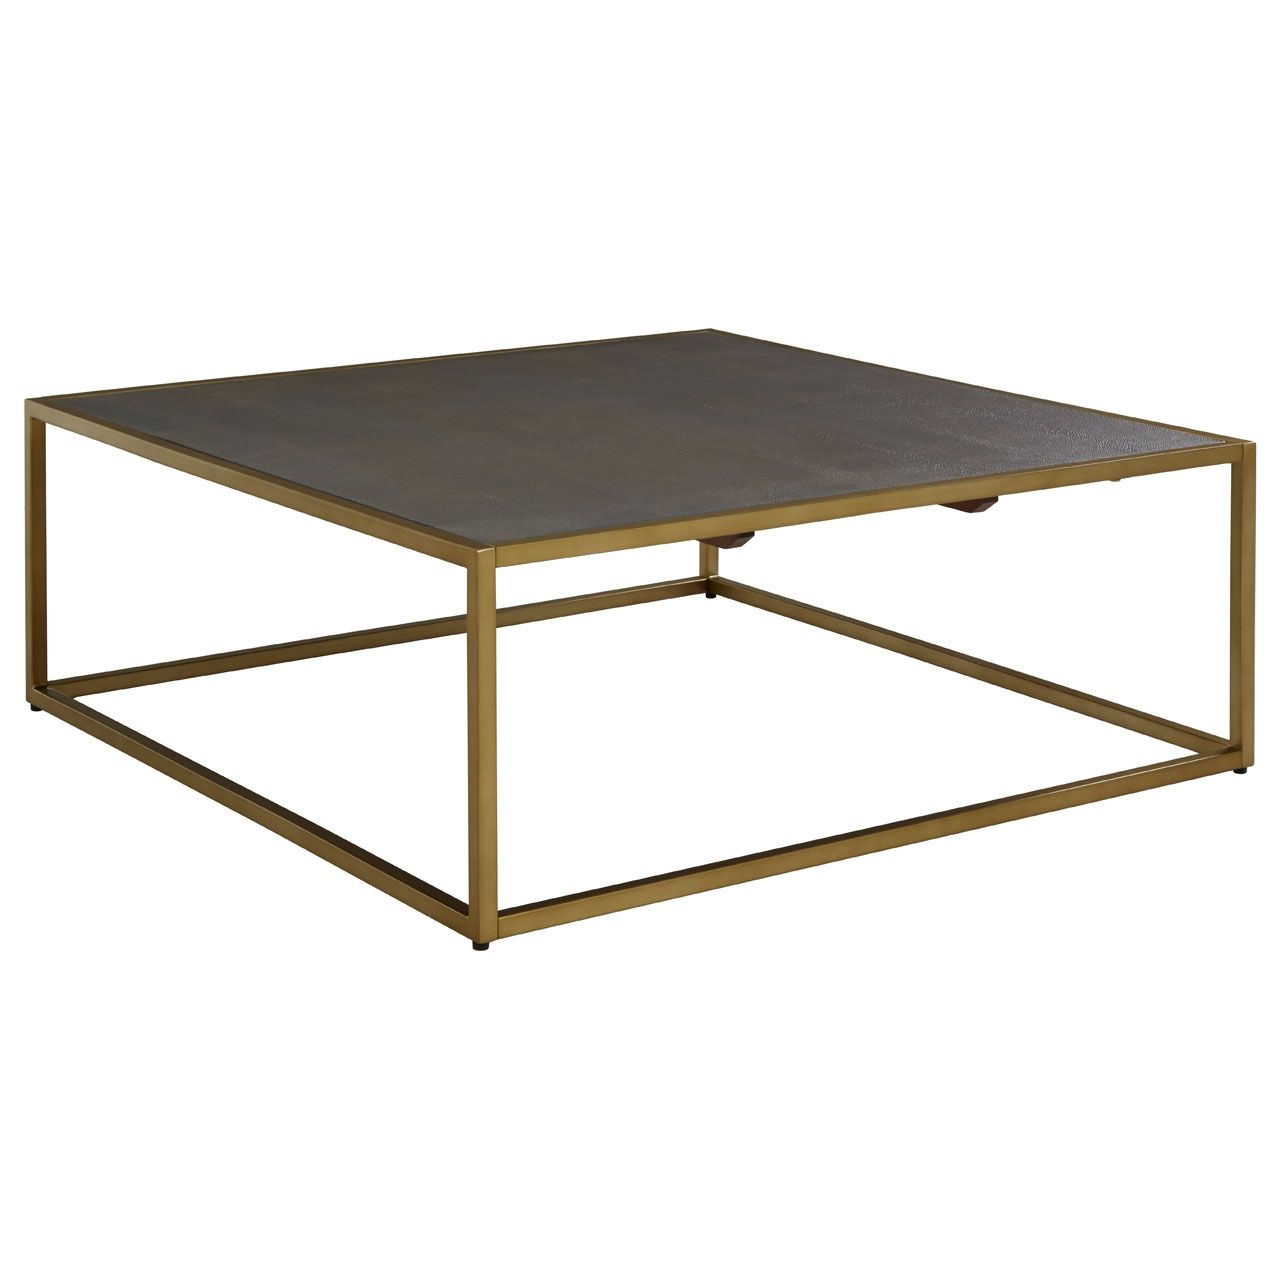 Kempton Wooden Coffee Table In Brown With Metal Frame